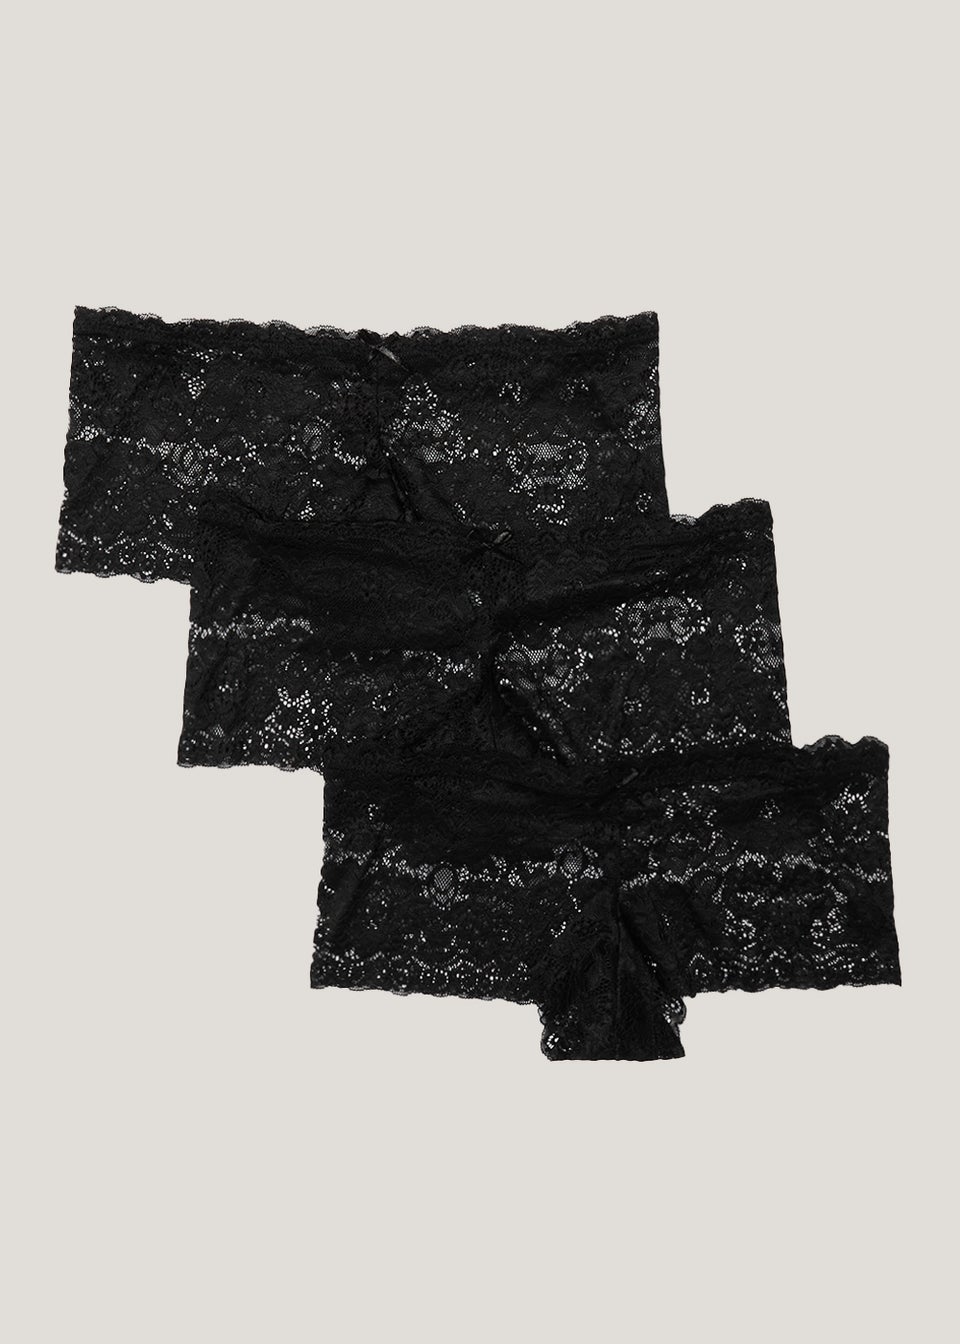 3 Pack Lace French Knickers